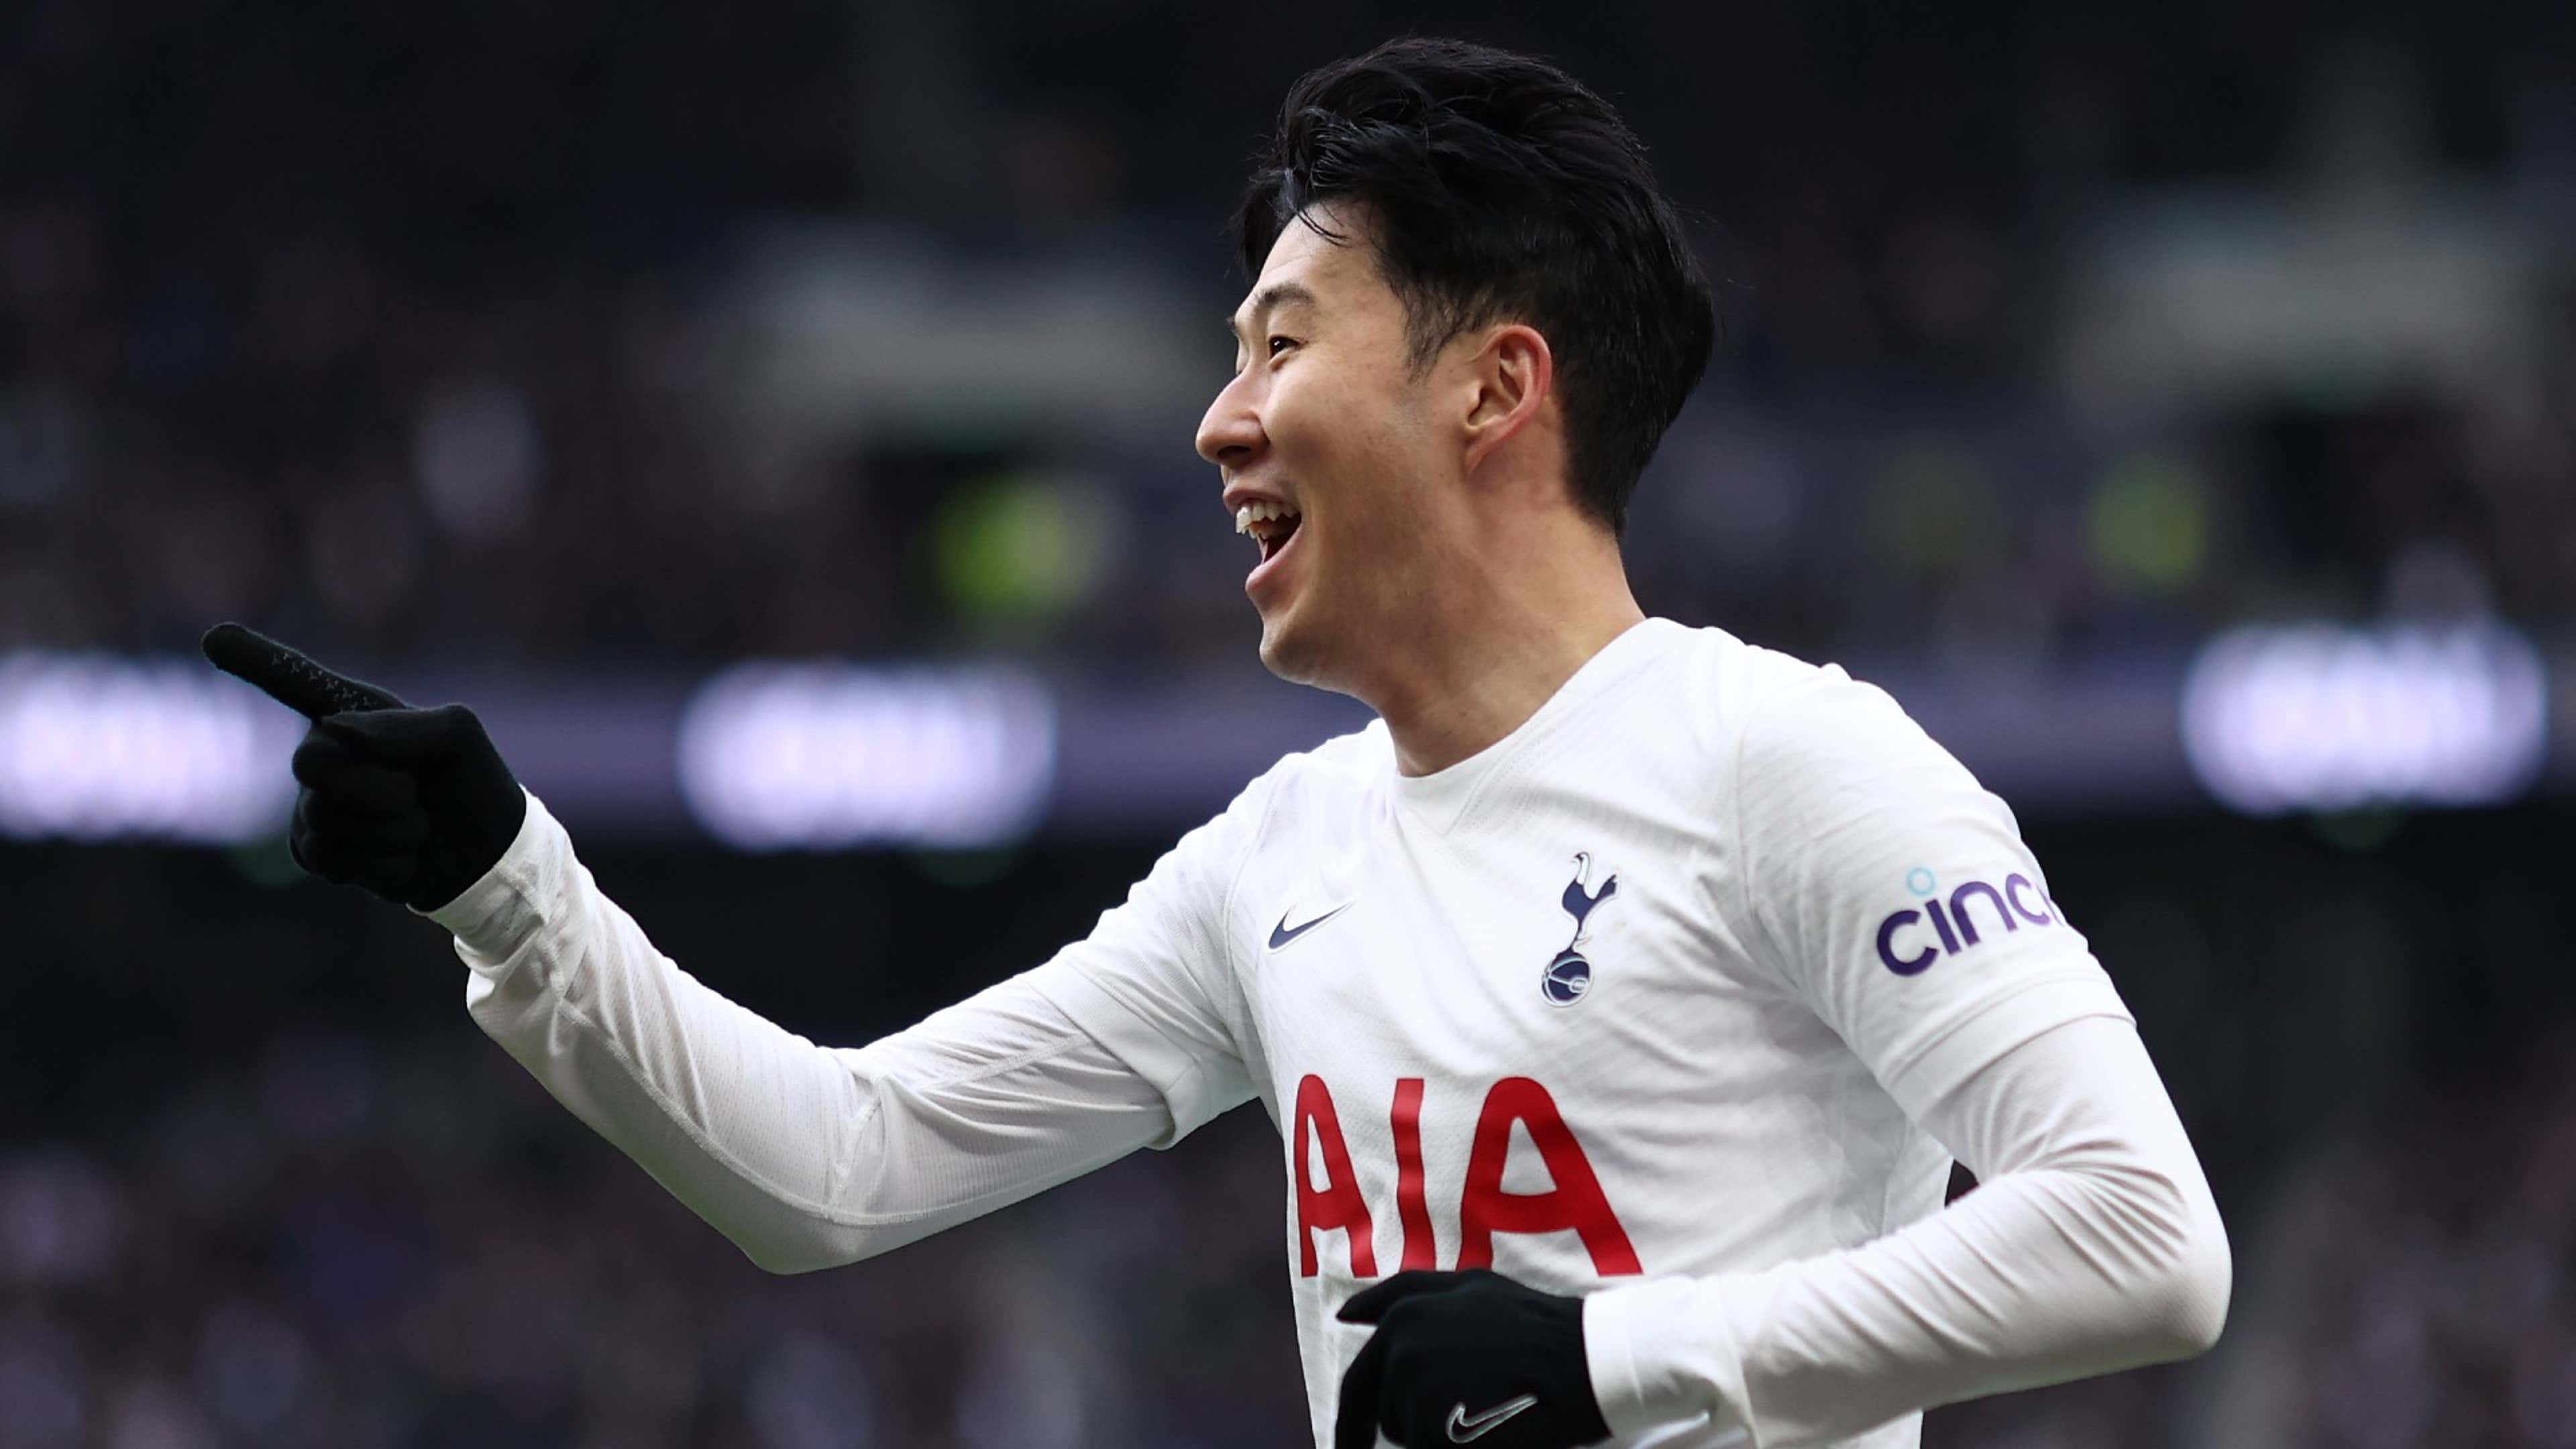 Heung-min Son - Career in Shirts